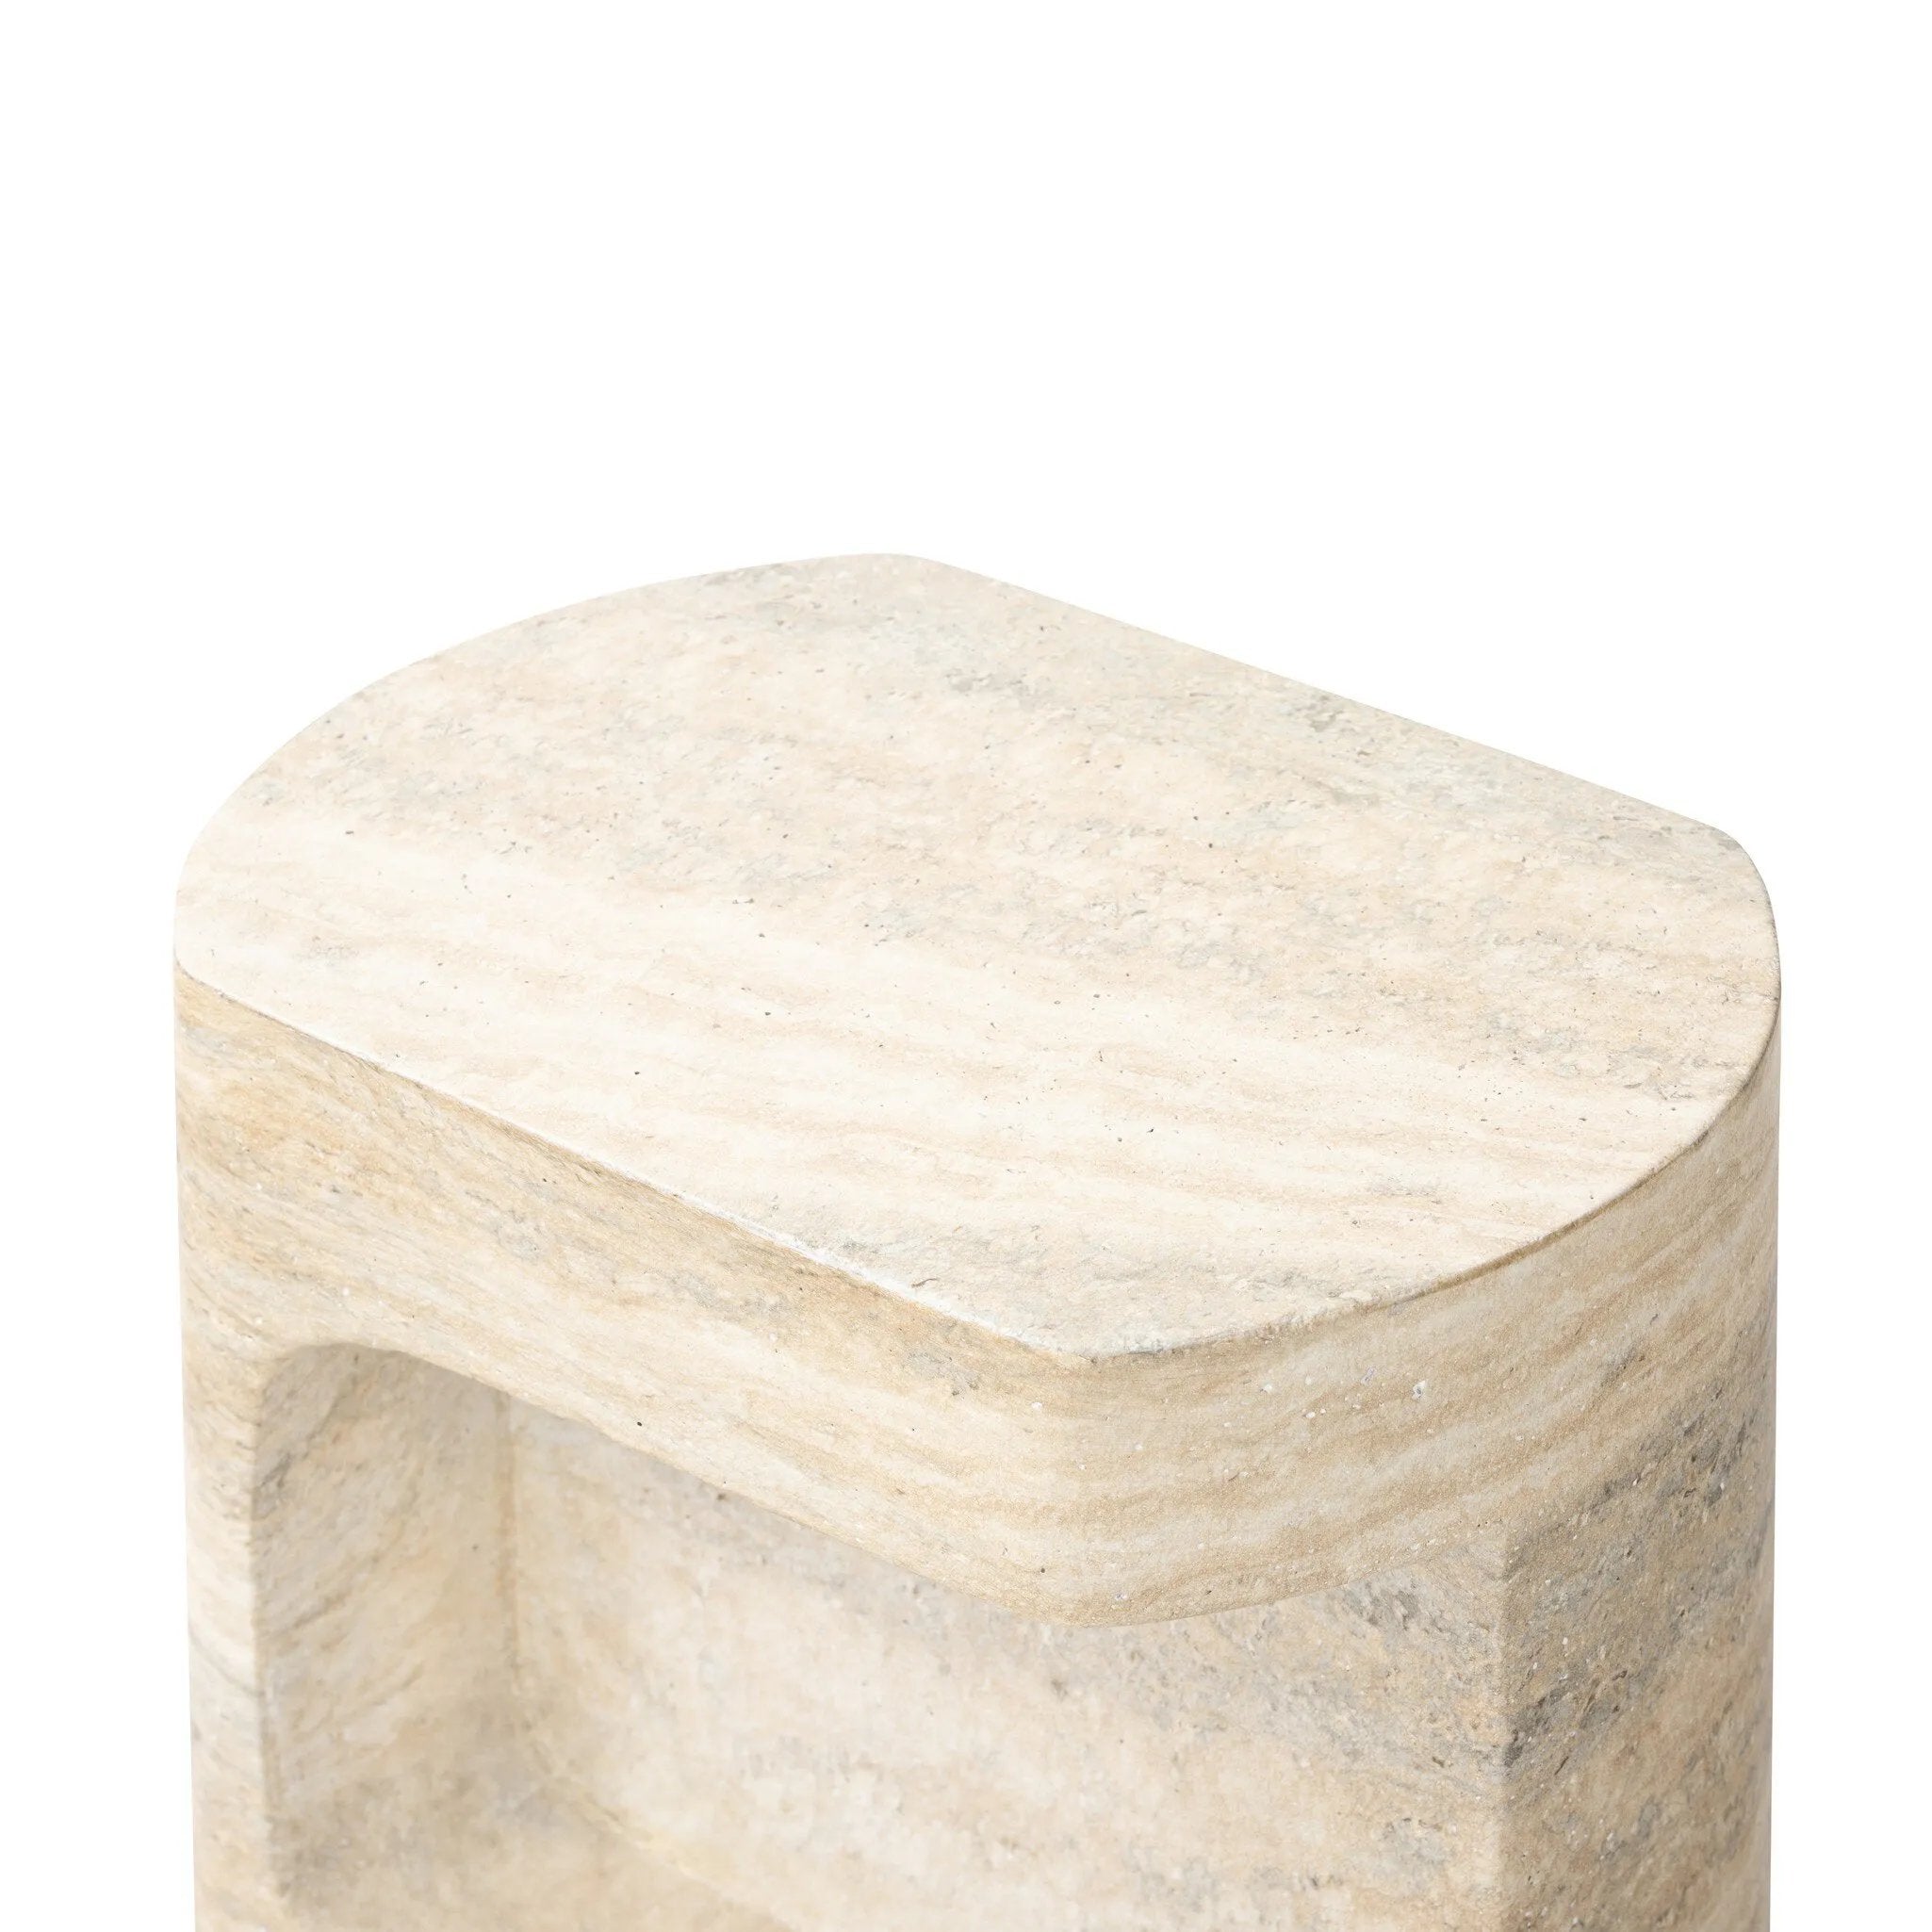 Cutout detailing brings a clean, modern vibe to a versatile end table of cast concrete. A water transfer finish creates a textured look and sandy hue resembling natural travertine.Collection: Chandle Amethyst Home provides interior design, new home construction design consulting, vintage area rugs, and lighting in the Alpharetta metro area.